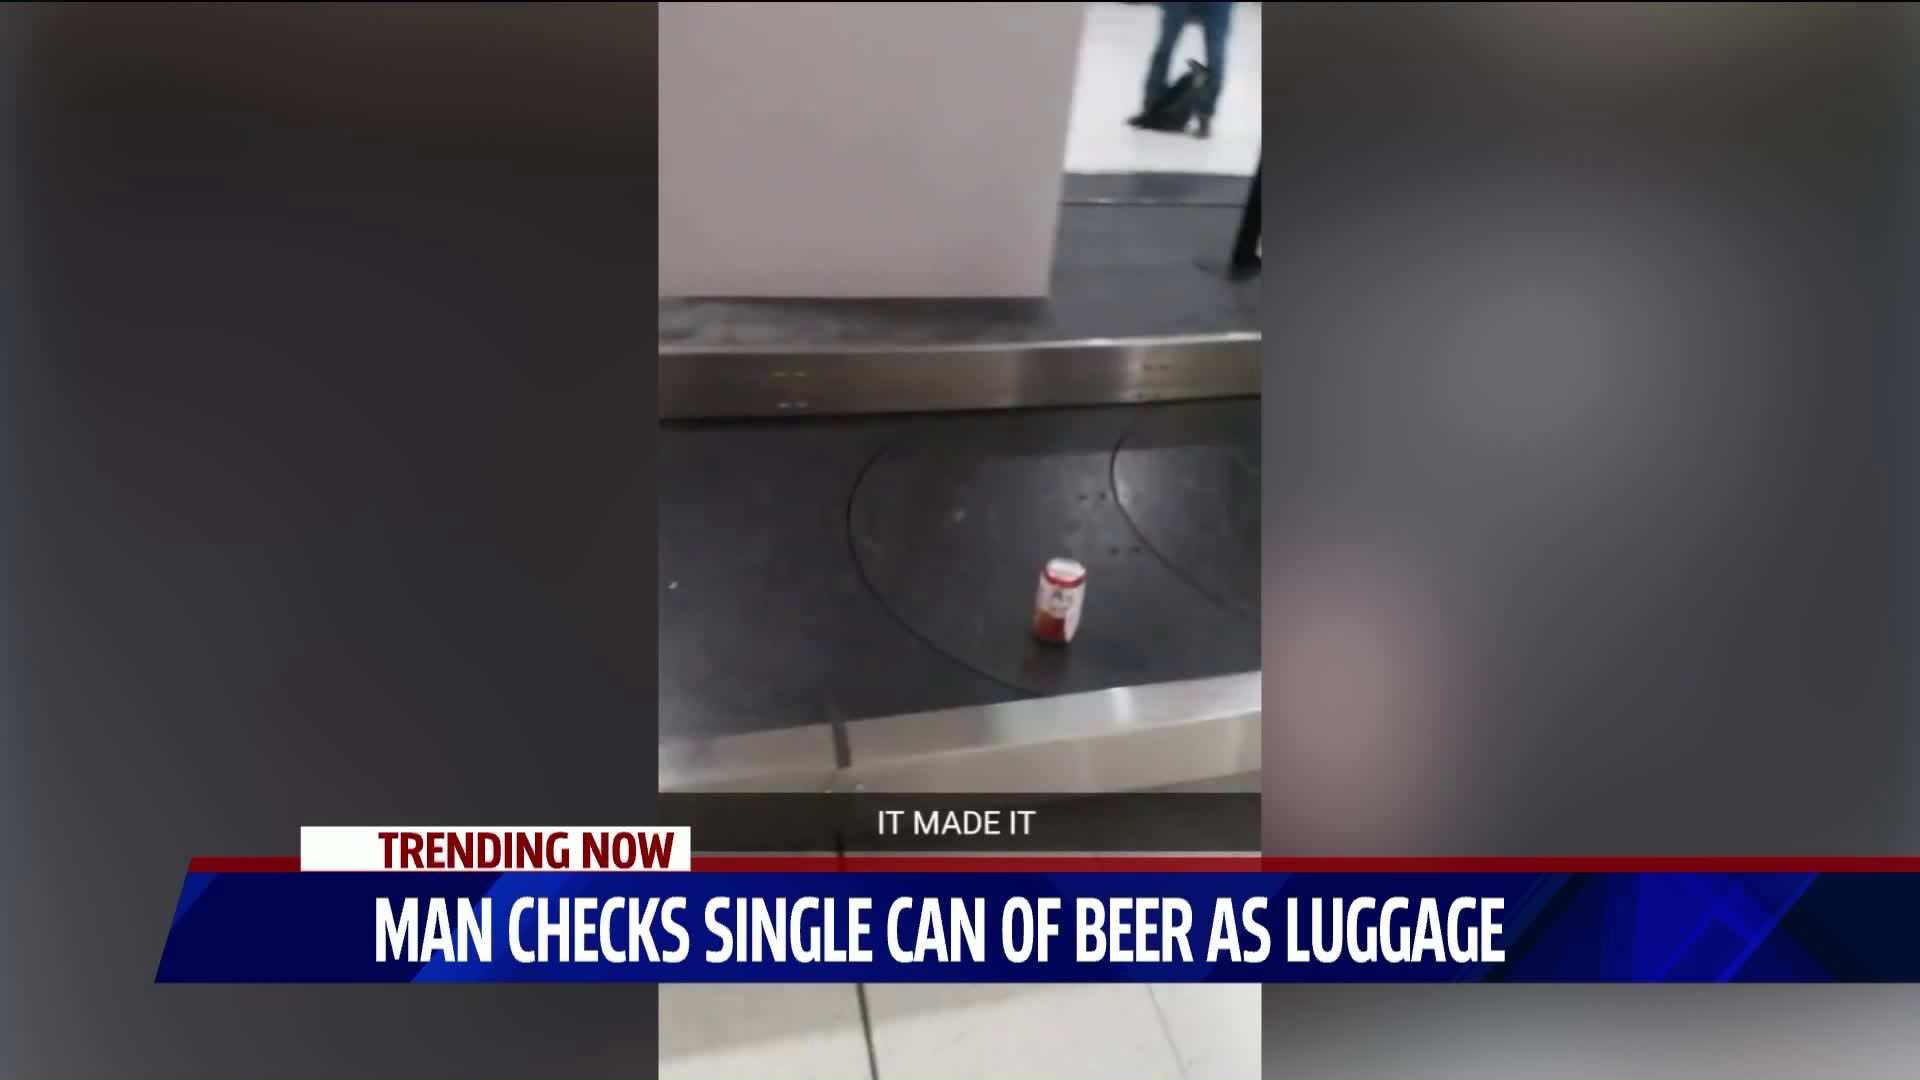 Man checks one can of beer for luggage